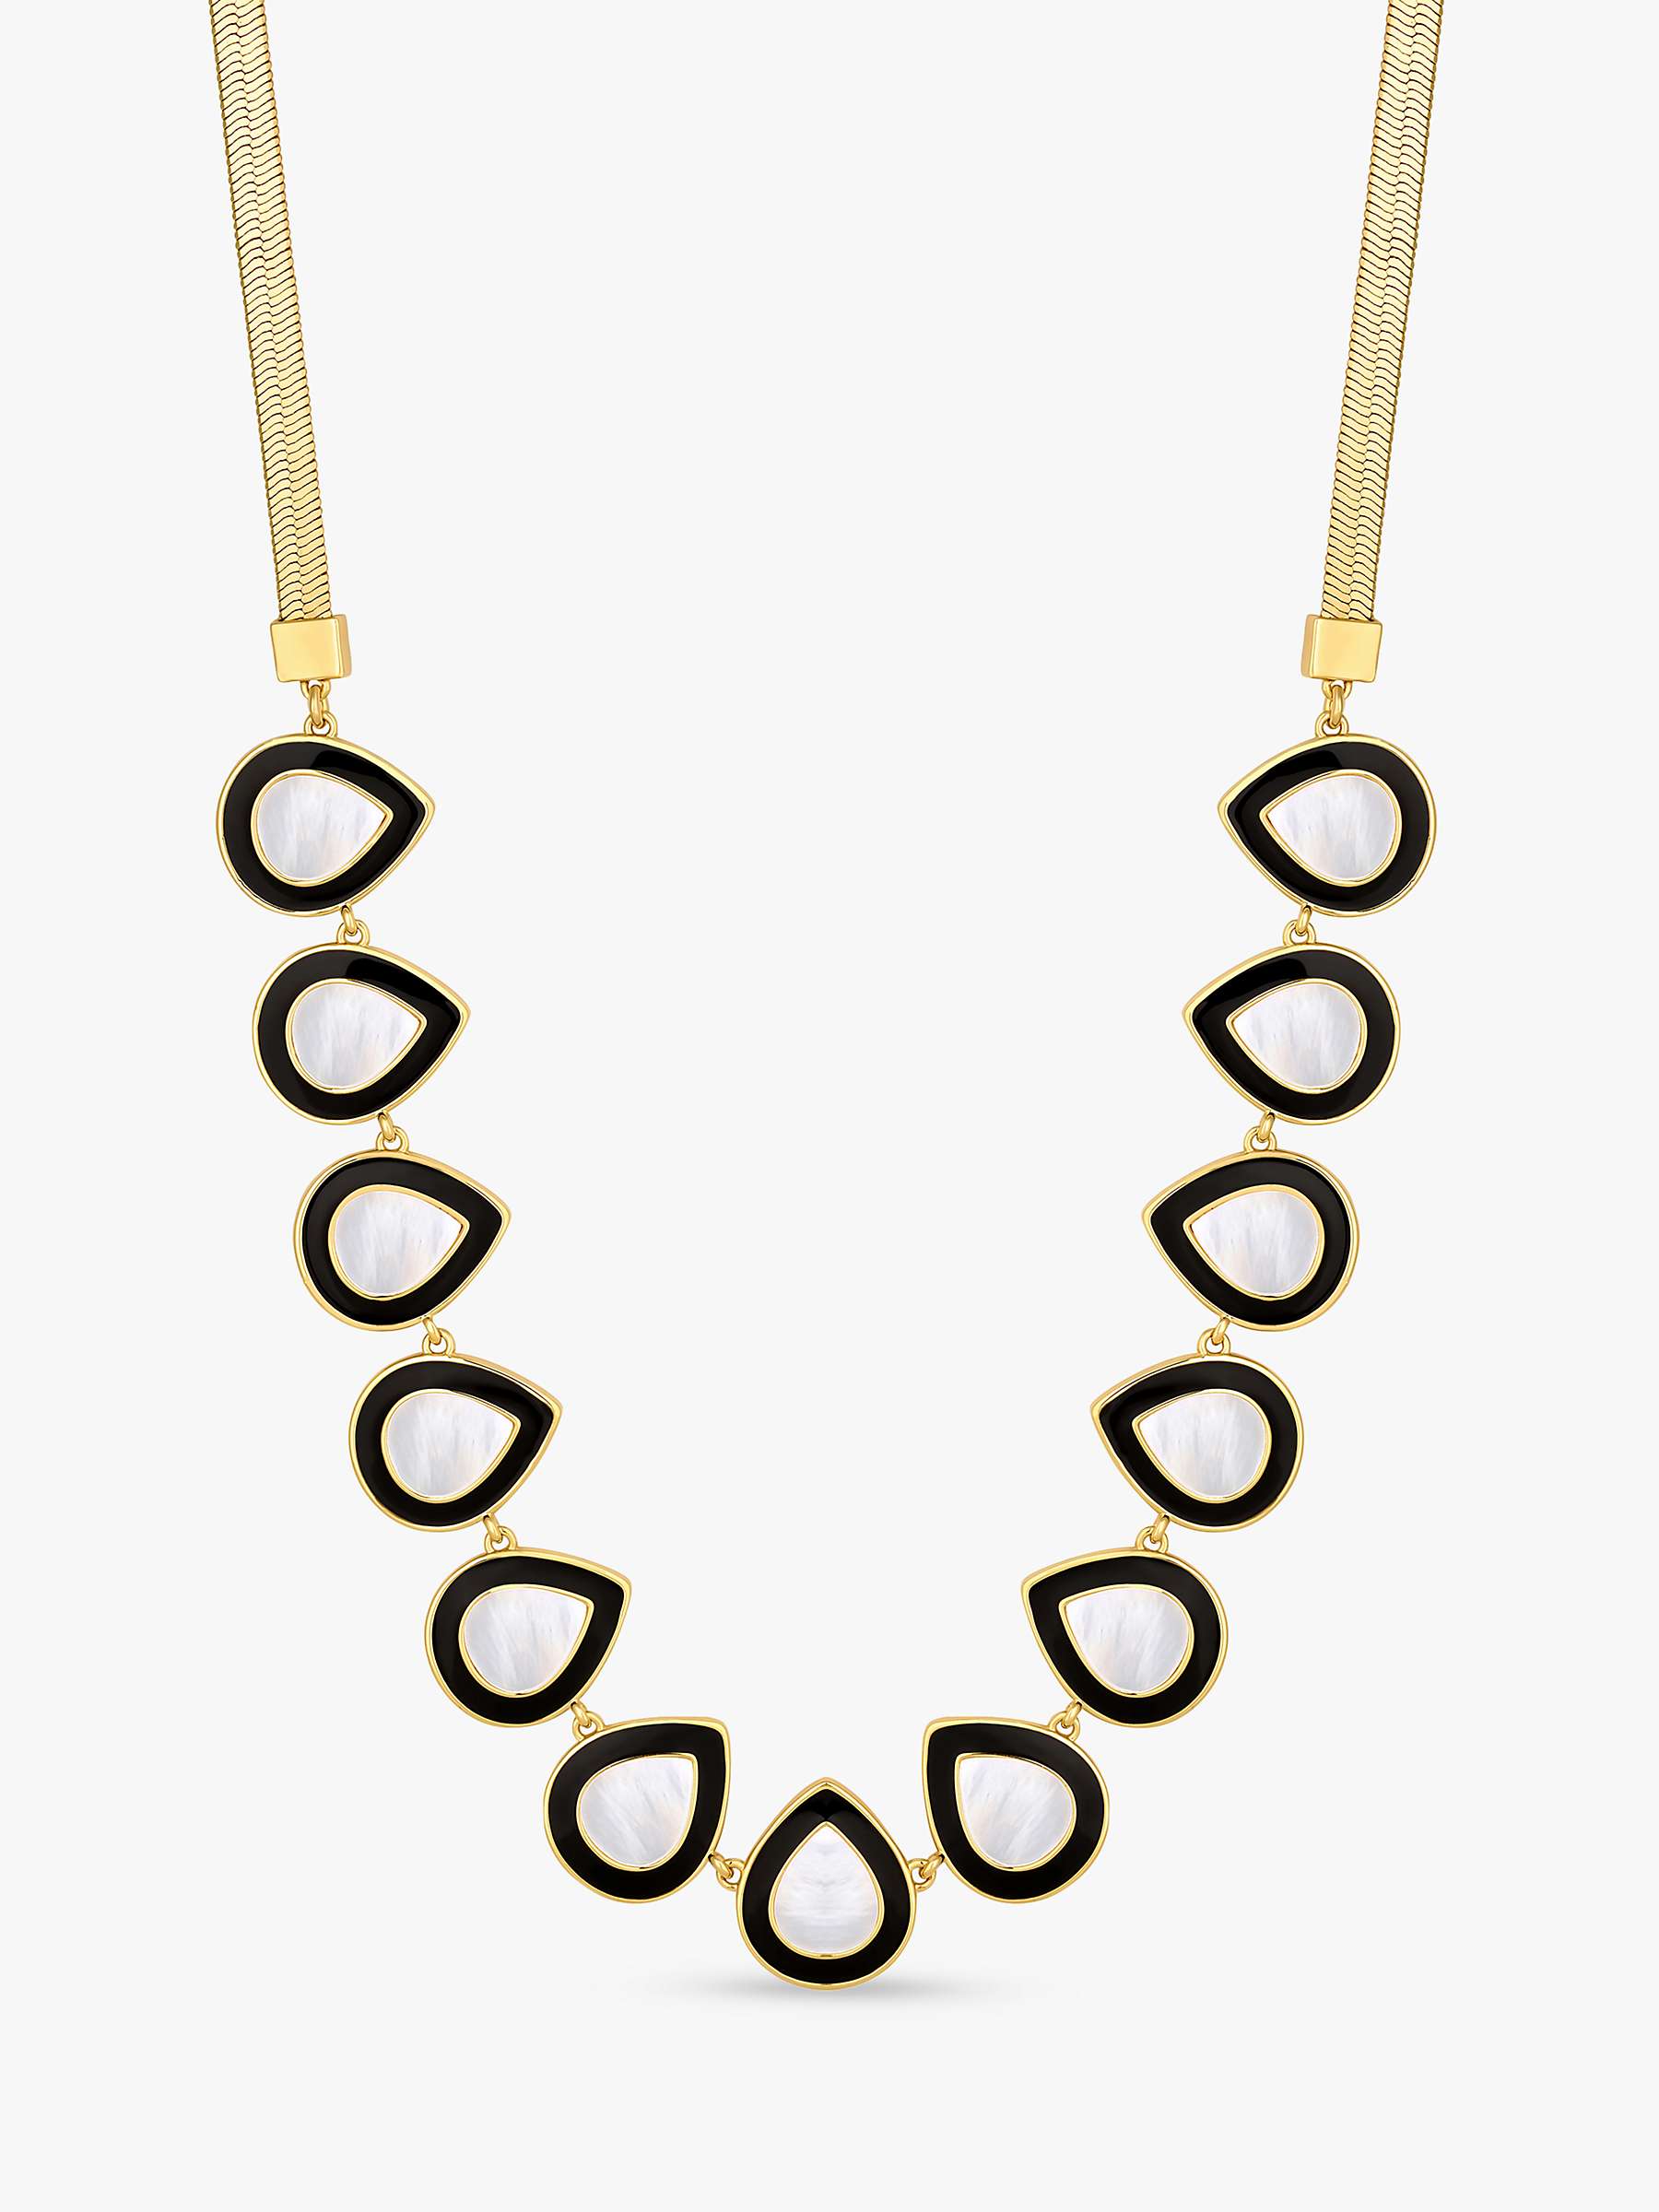 Buy Jon Richard Recycled Gold Plated Enamel And Mother Of Pearl Necklace, Gold/Black Online at johnlewis.com